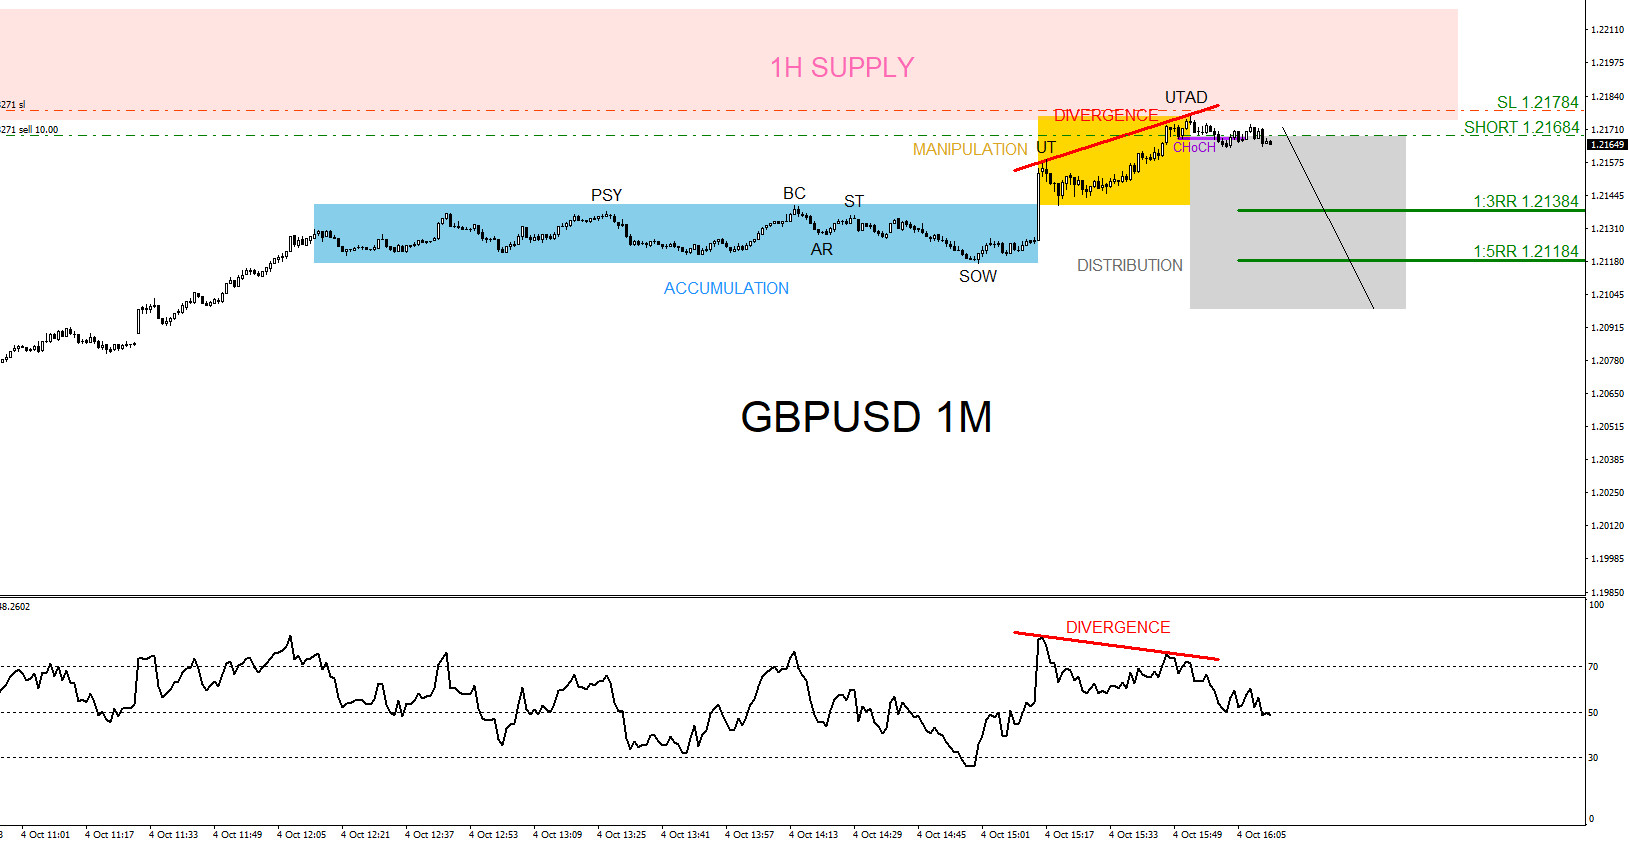 GBPUSD : Sell Trade Hits Targets